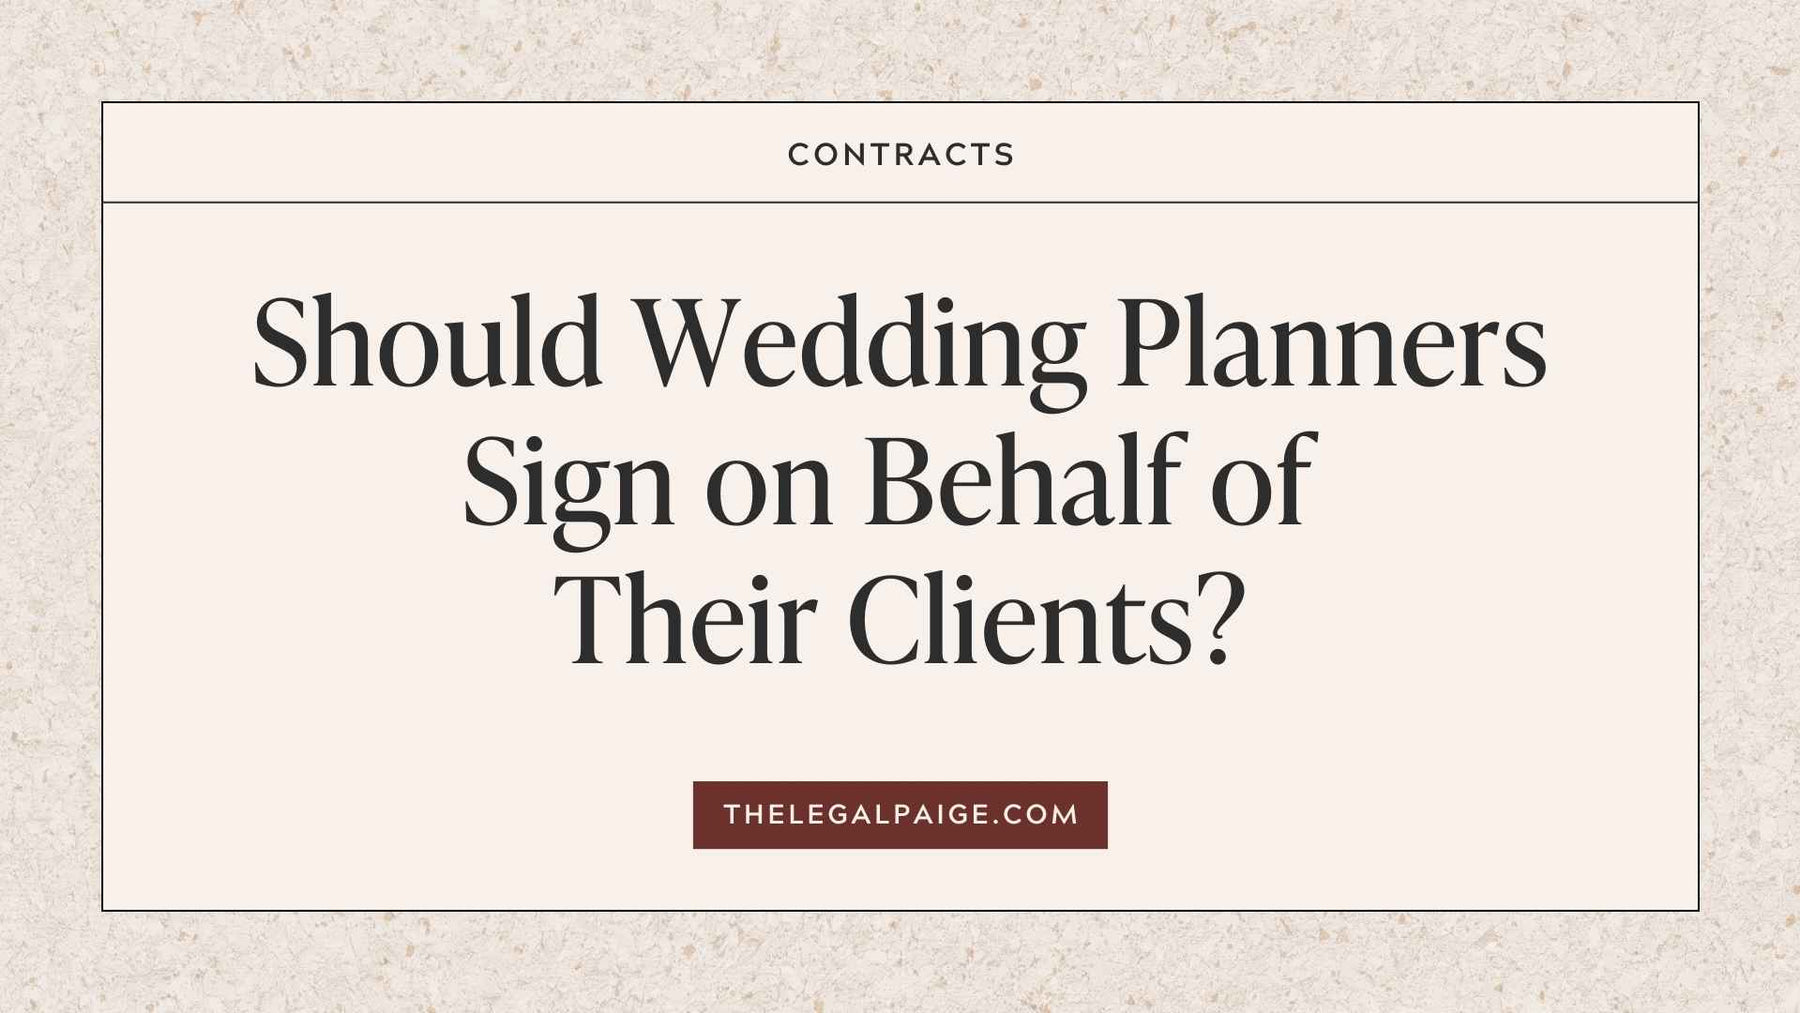 Should Wedding Planners Sign on Behalf of Their Clients?